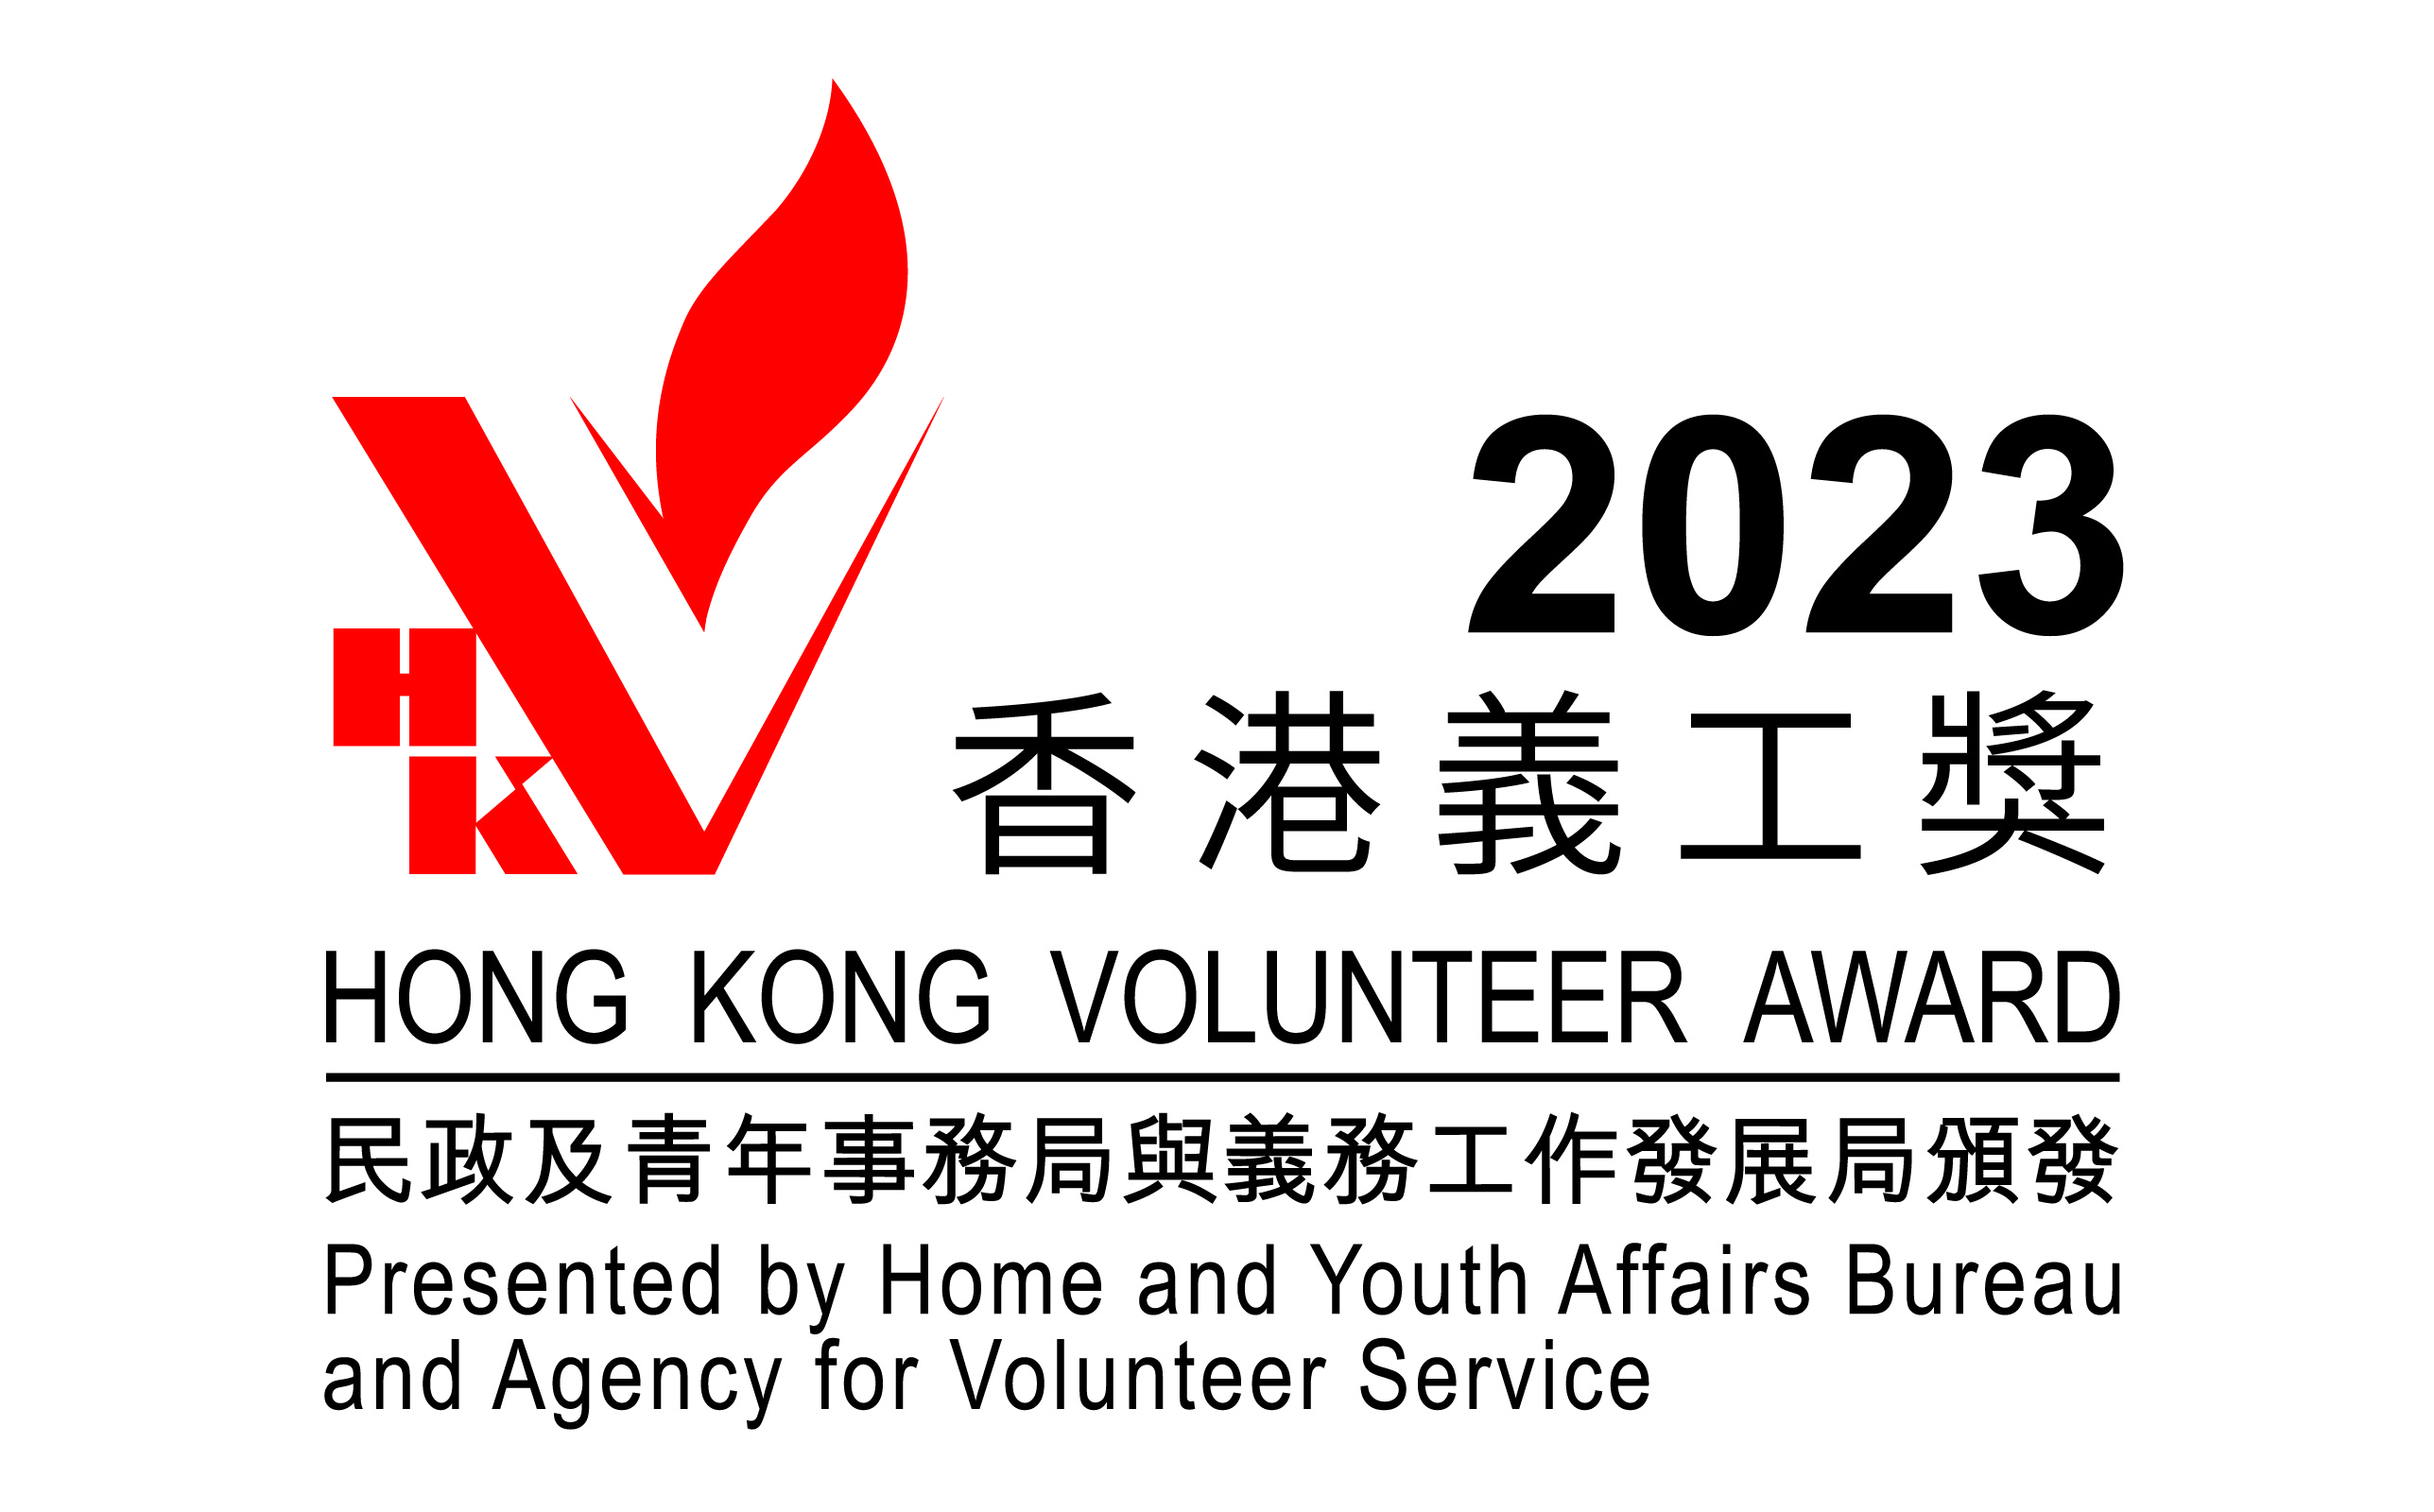 Hong Kong Volunteer Award 2023 Presented by Home and Youth Affairs Bureau and the Agency for Volunteer Service